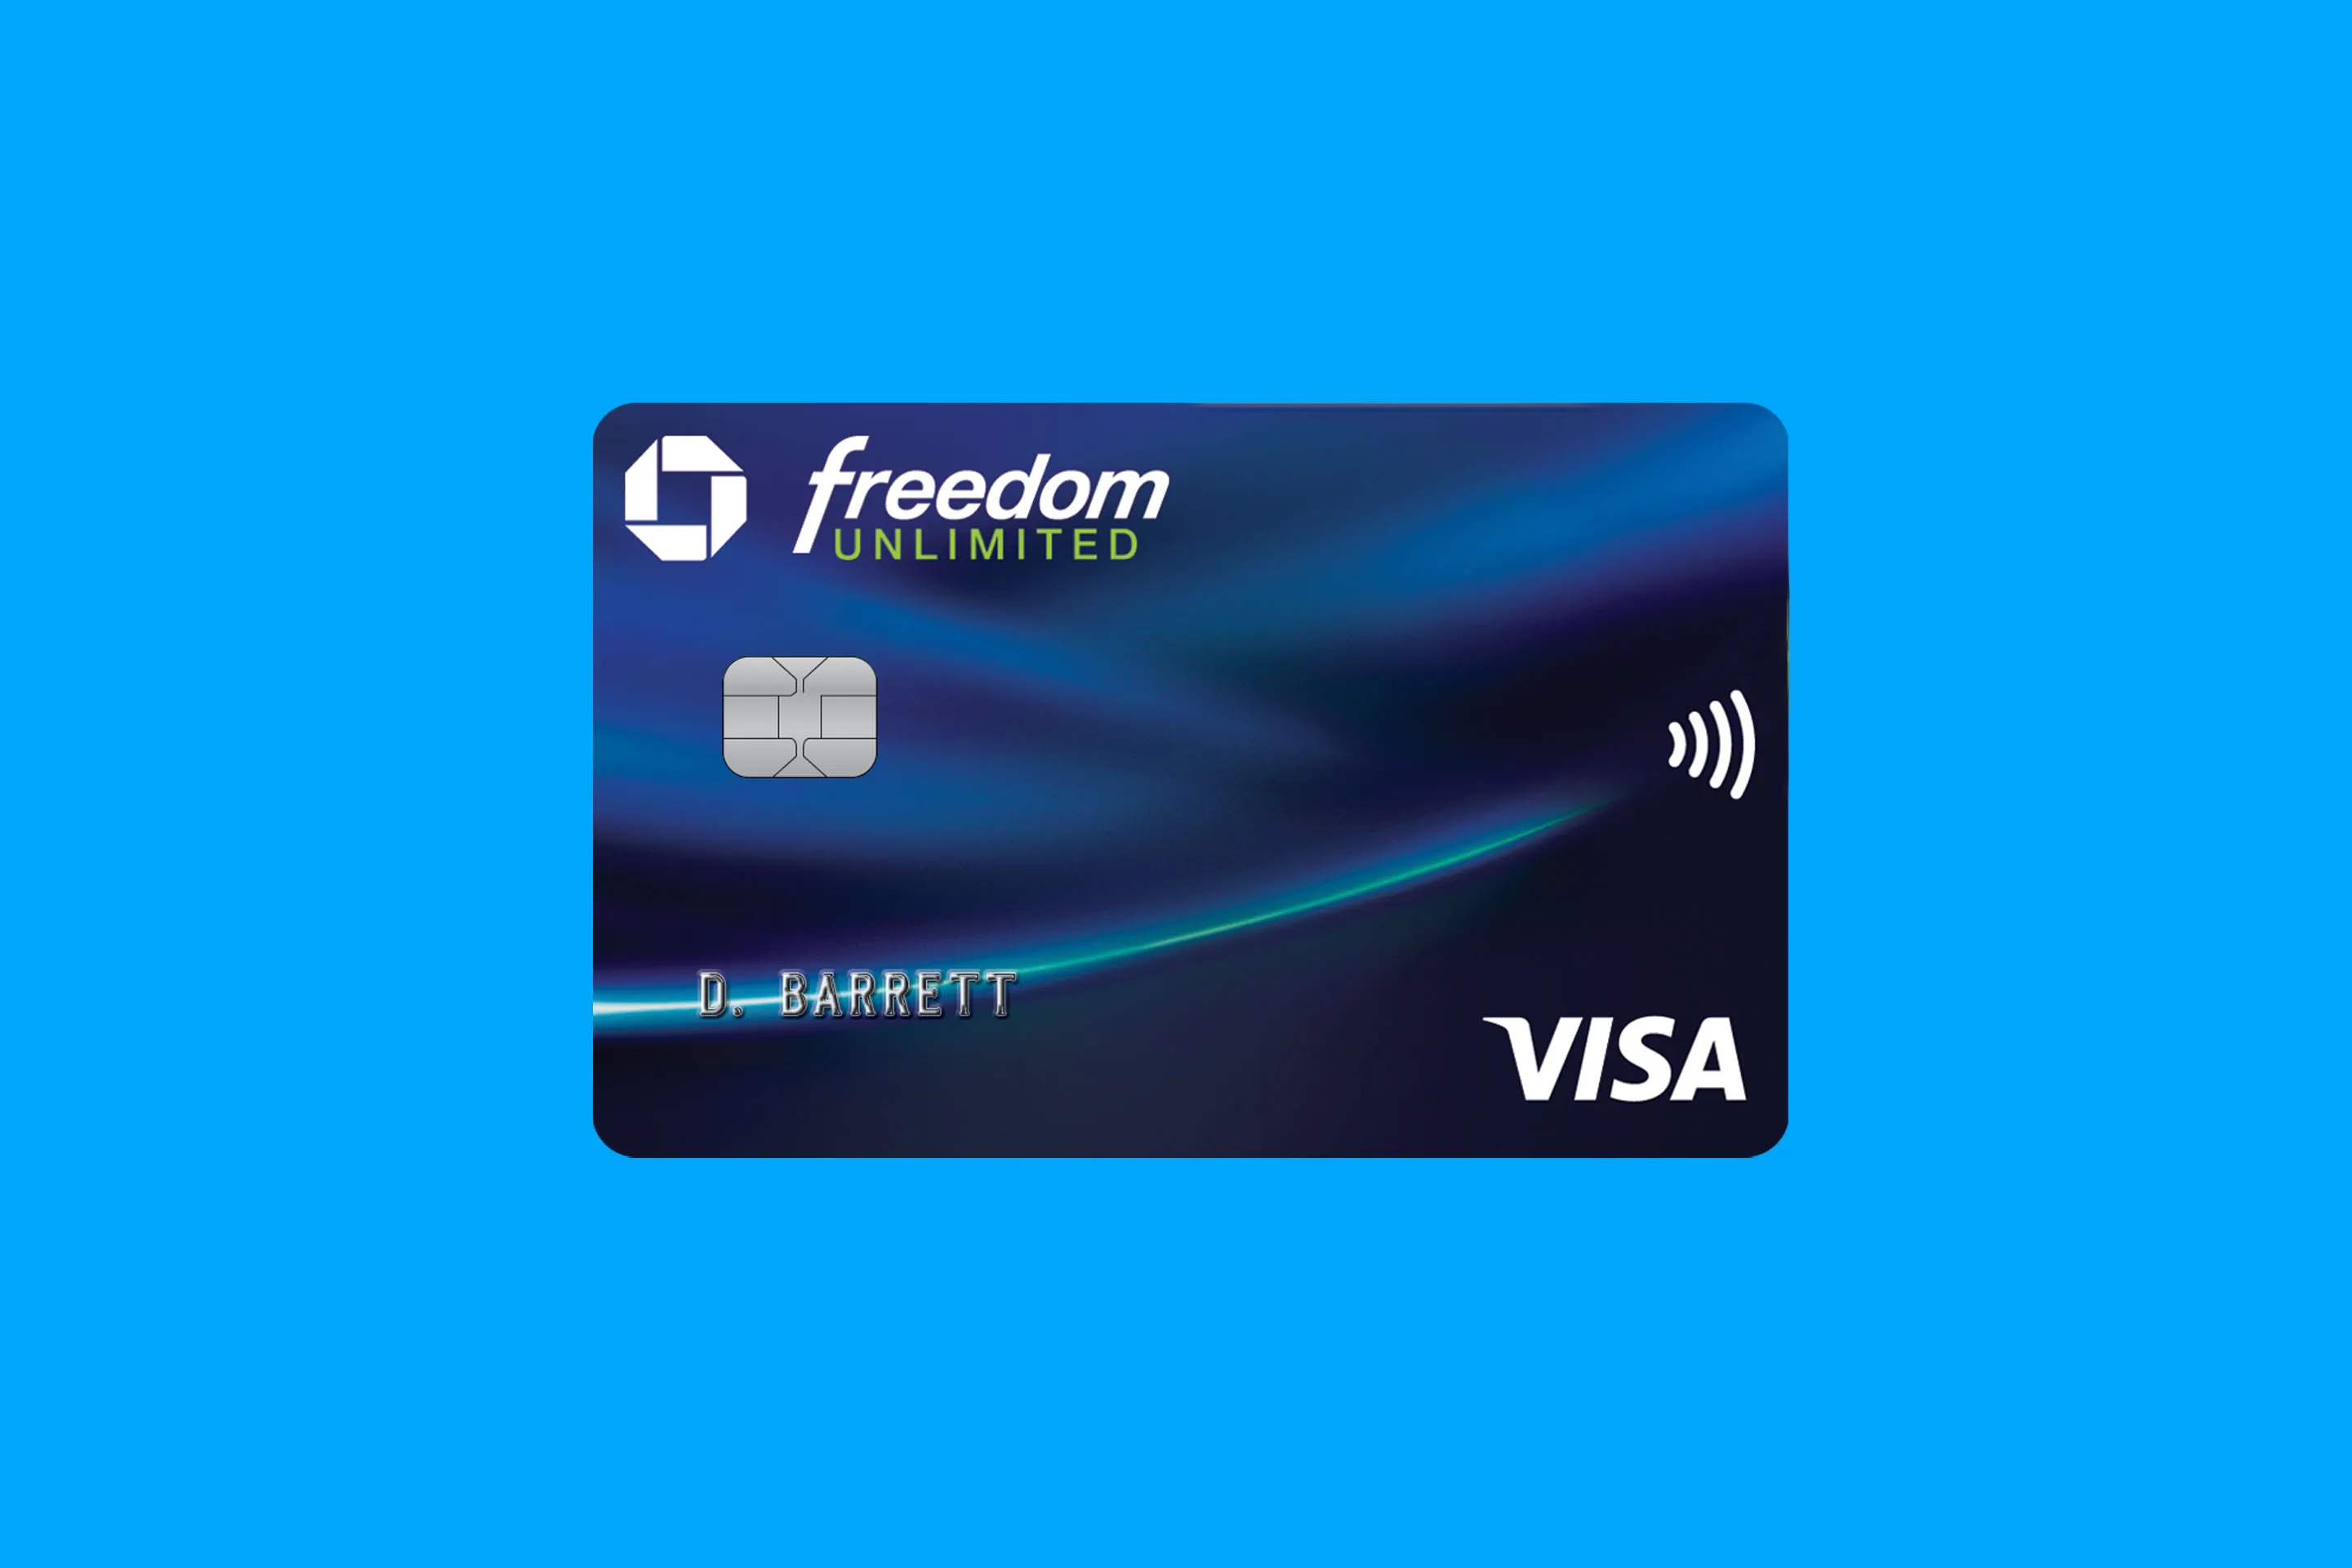 chase freedom card promotion $300